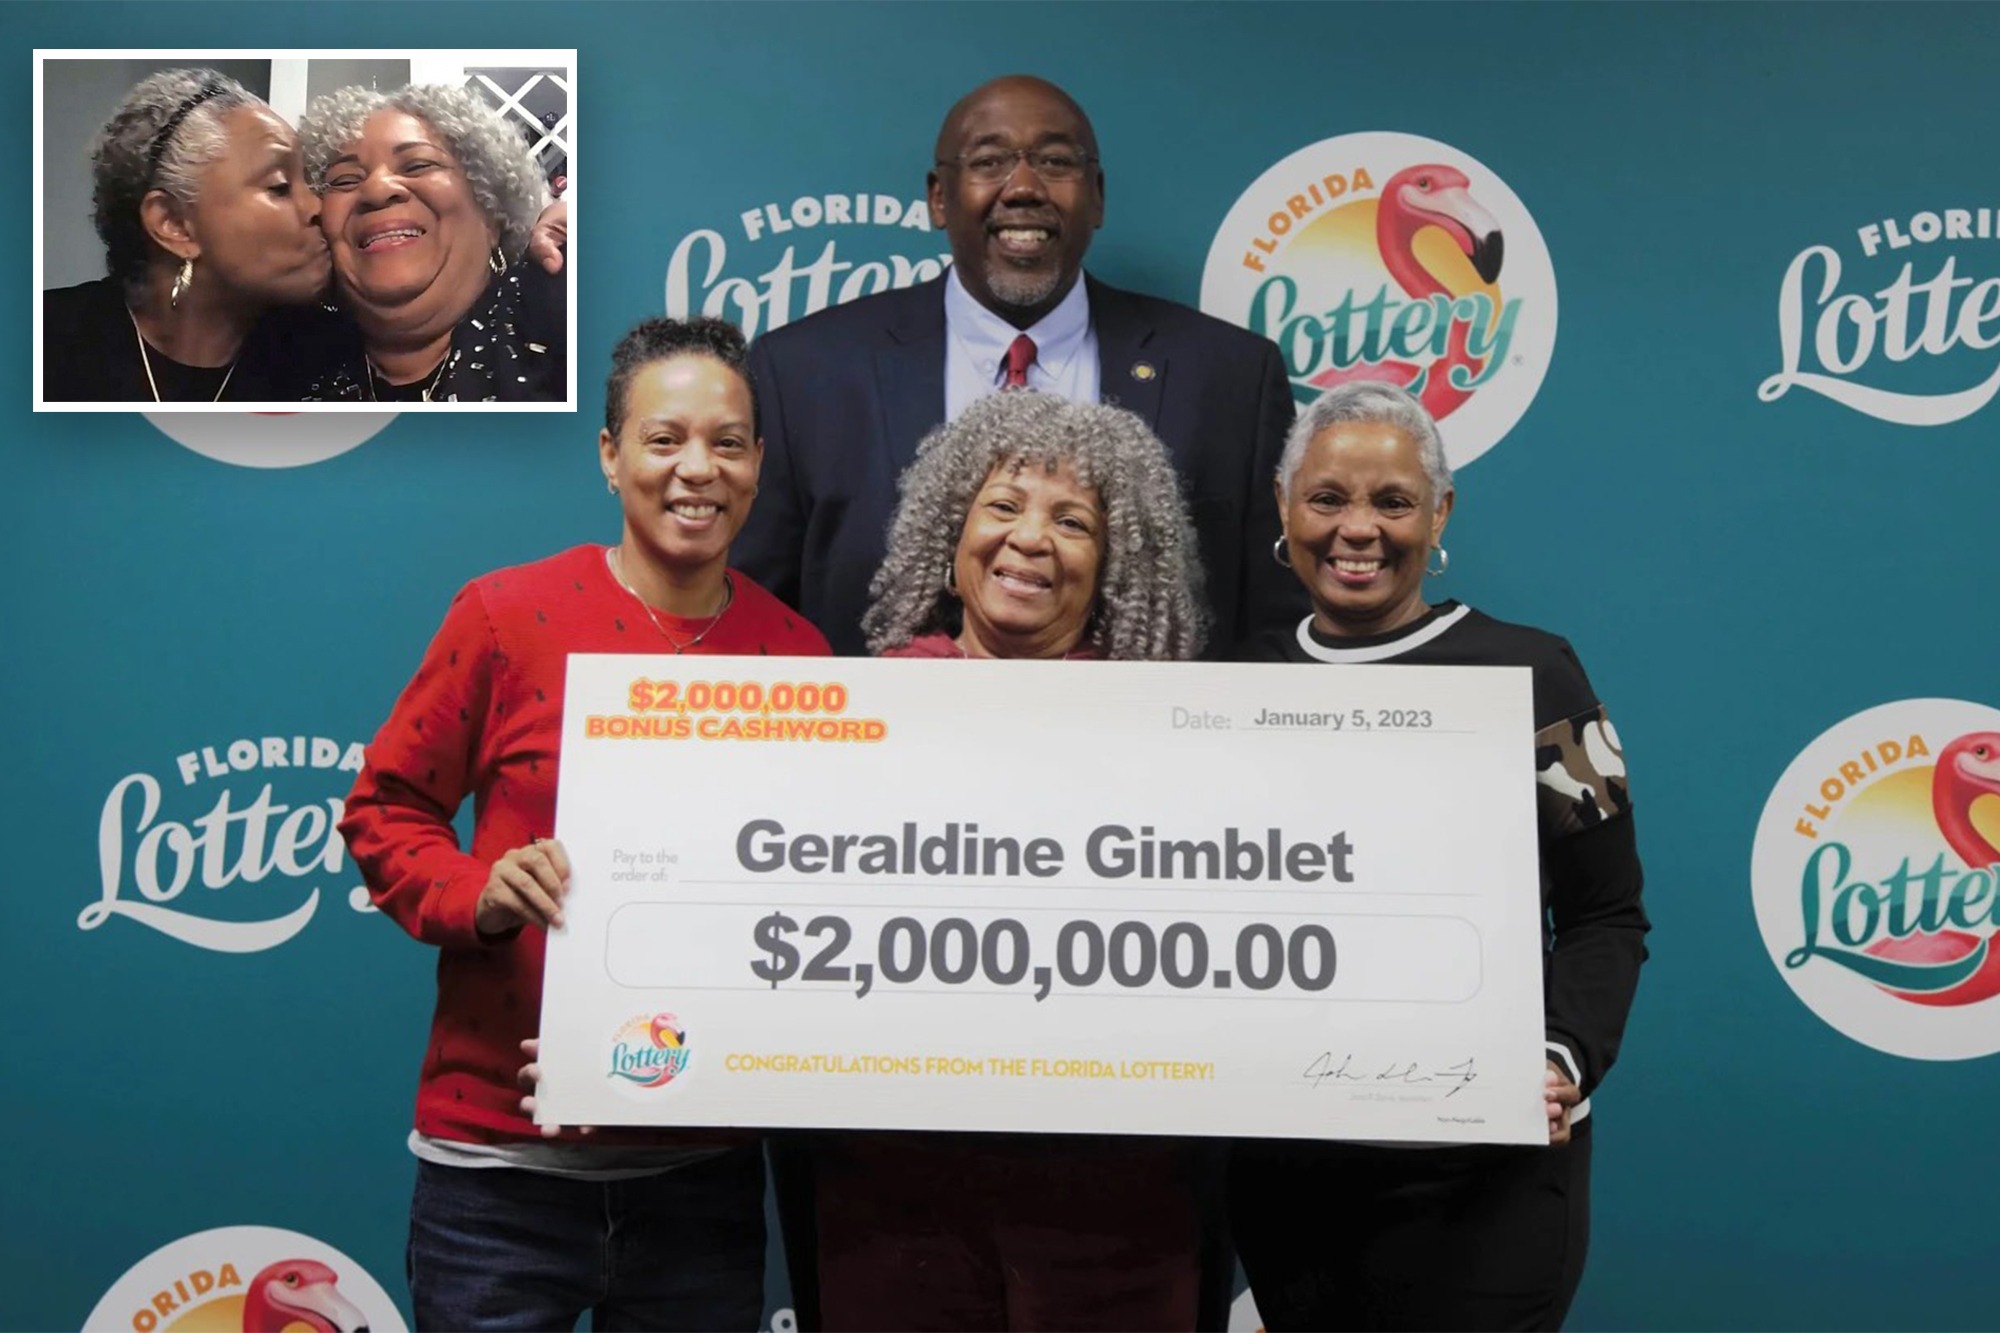 I spent life savings on my kid’s cancer treatment — then won $2M lottery